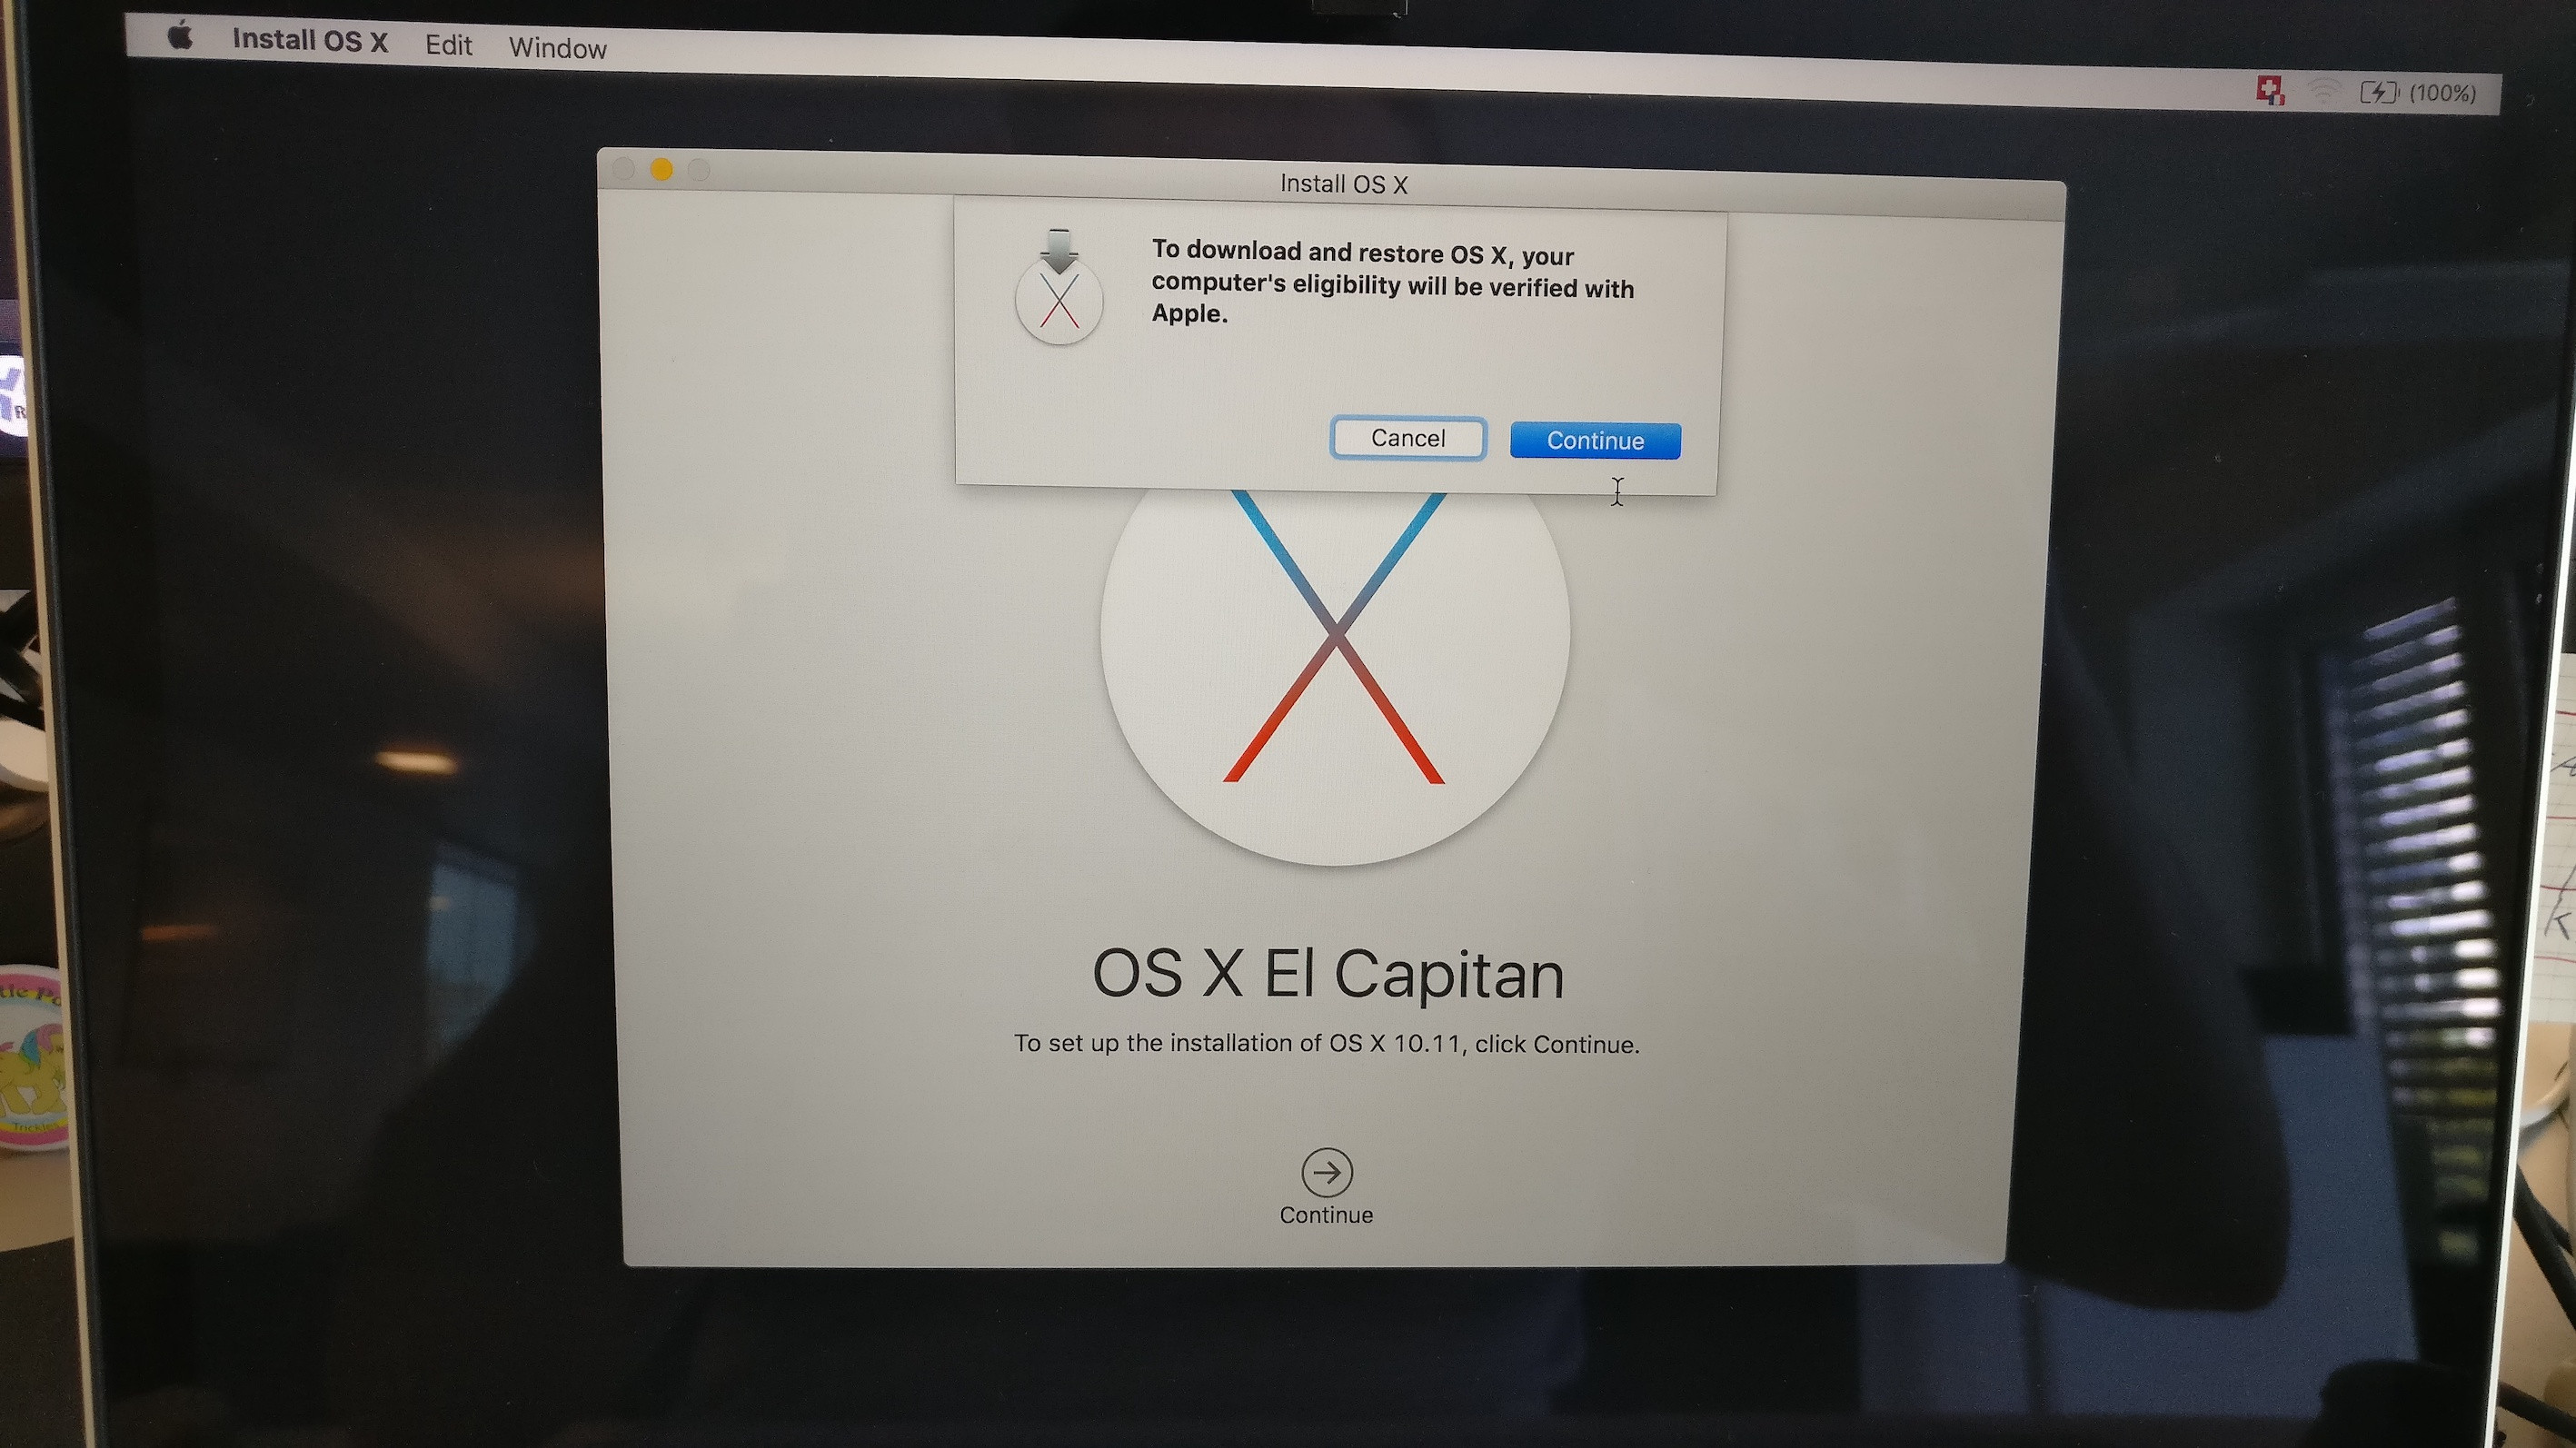 reinstall mac os sierra without losing data